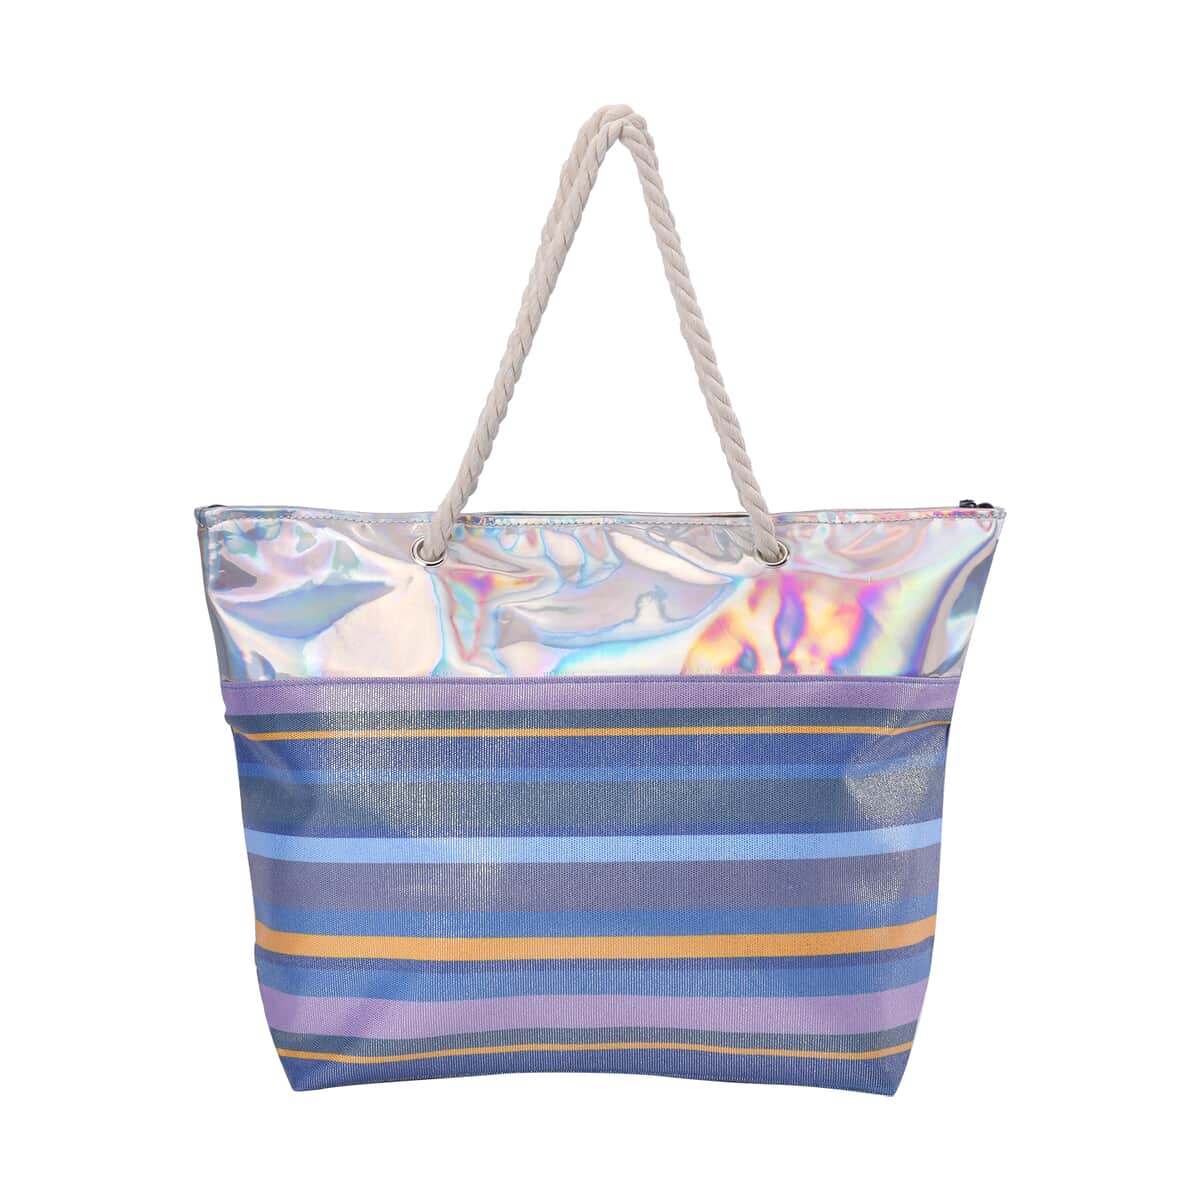 Blue and Gray Streak Pattern Canvas Faux Leather Tote Bag (19.7"x5.5"x14") image number 0